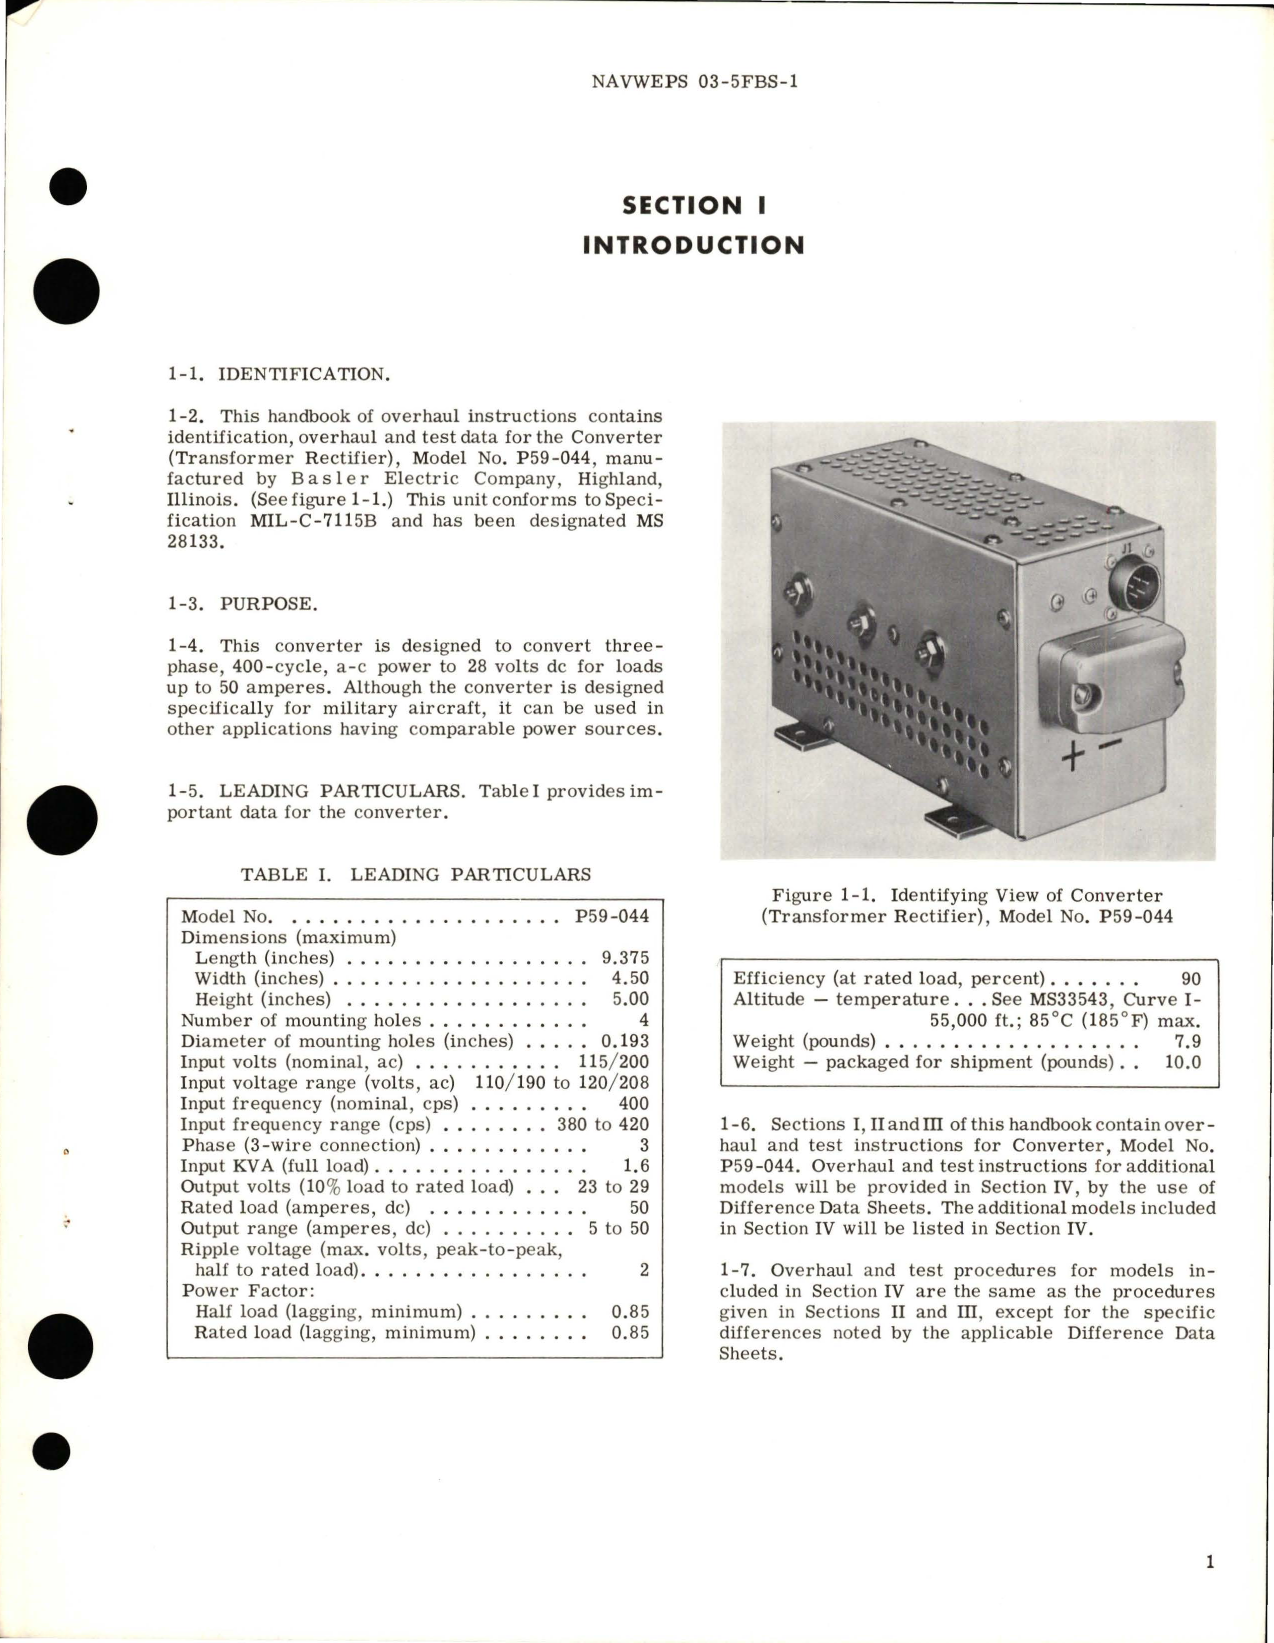 Sample page 5 from AirCorps Library document: Overhaul Instructions for Transformer Rectifier Converter - Model P59-044